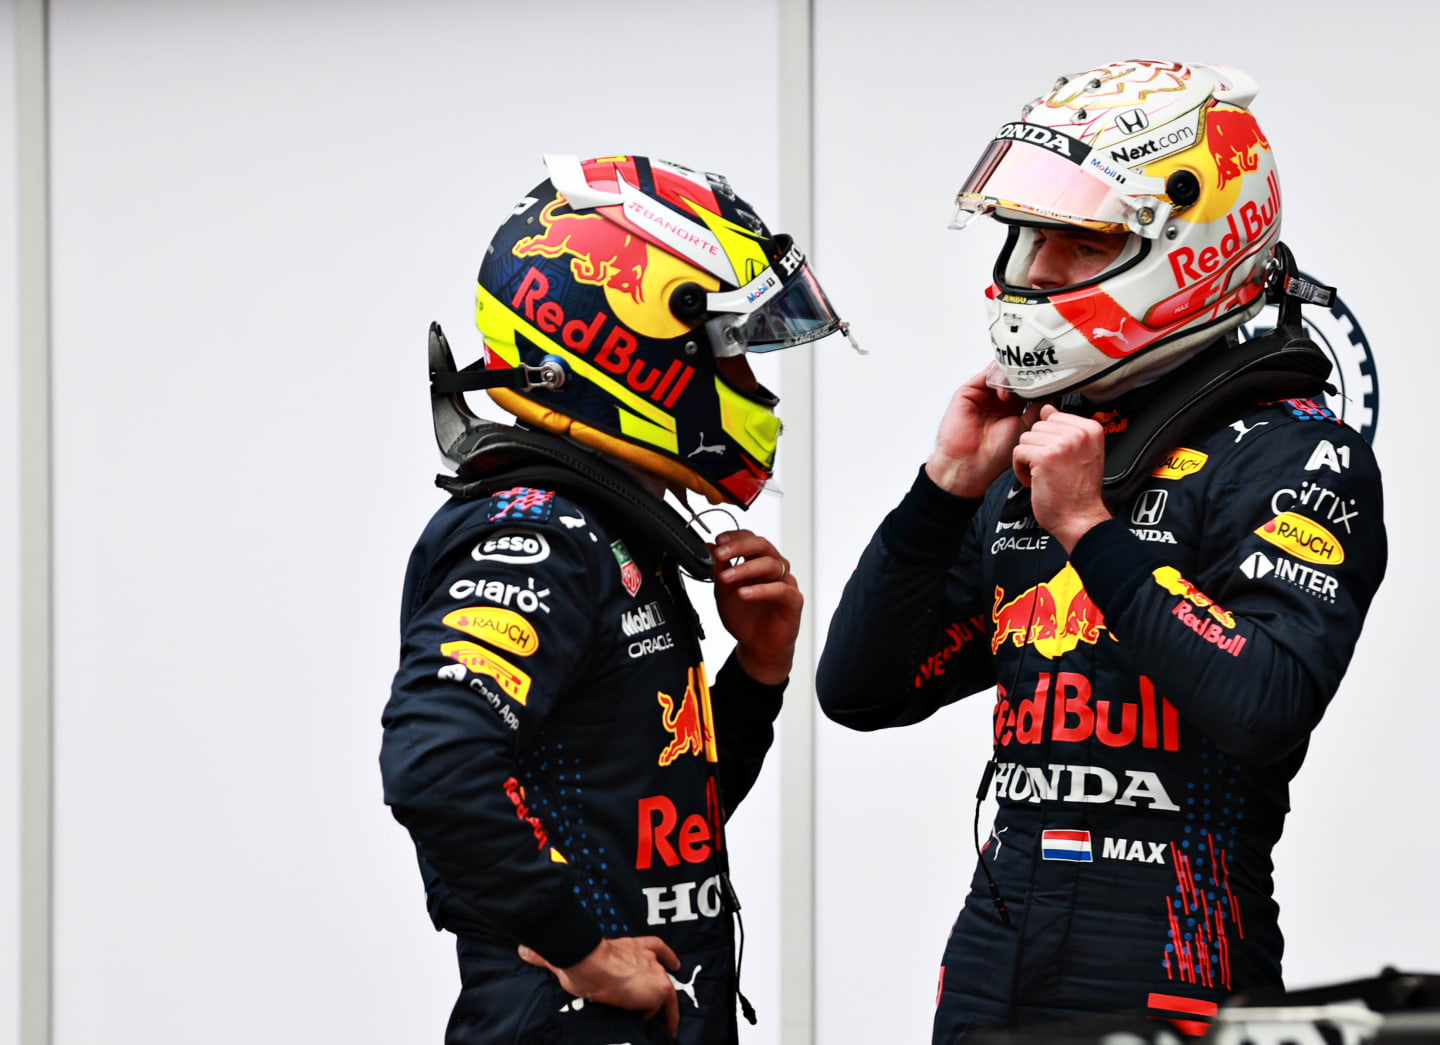 MONTE-CARLO, MONACO - MAY 22: Second place qualifier Max Verstappen of Netherlands and Red Bull Racing talks with Sergio Perez of Mexico and Red Bull Racing in parc ferme during qualifying for the F1 Grand Prix of Monaco at Circuit de Monaco on May 22, 2021 in Monte-Carlo, Monaco. (Photo by Mark Thompson/Getty Images)